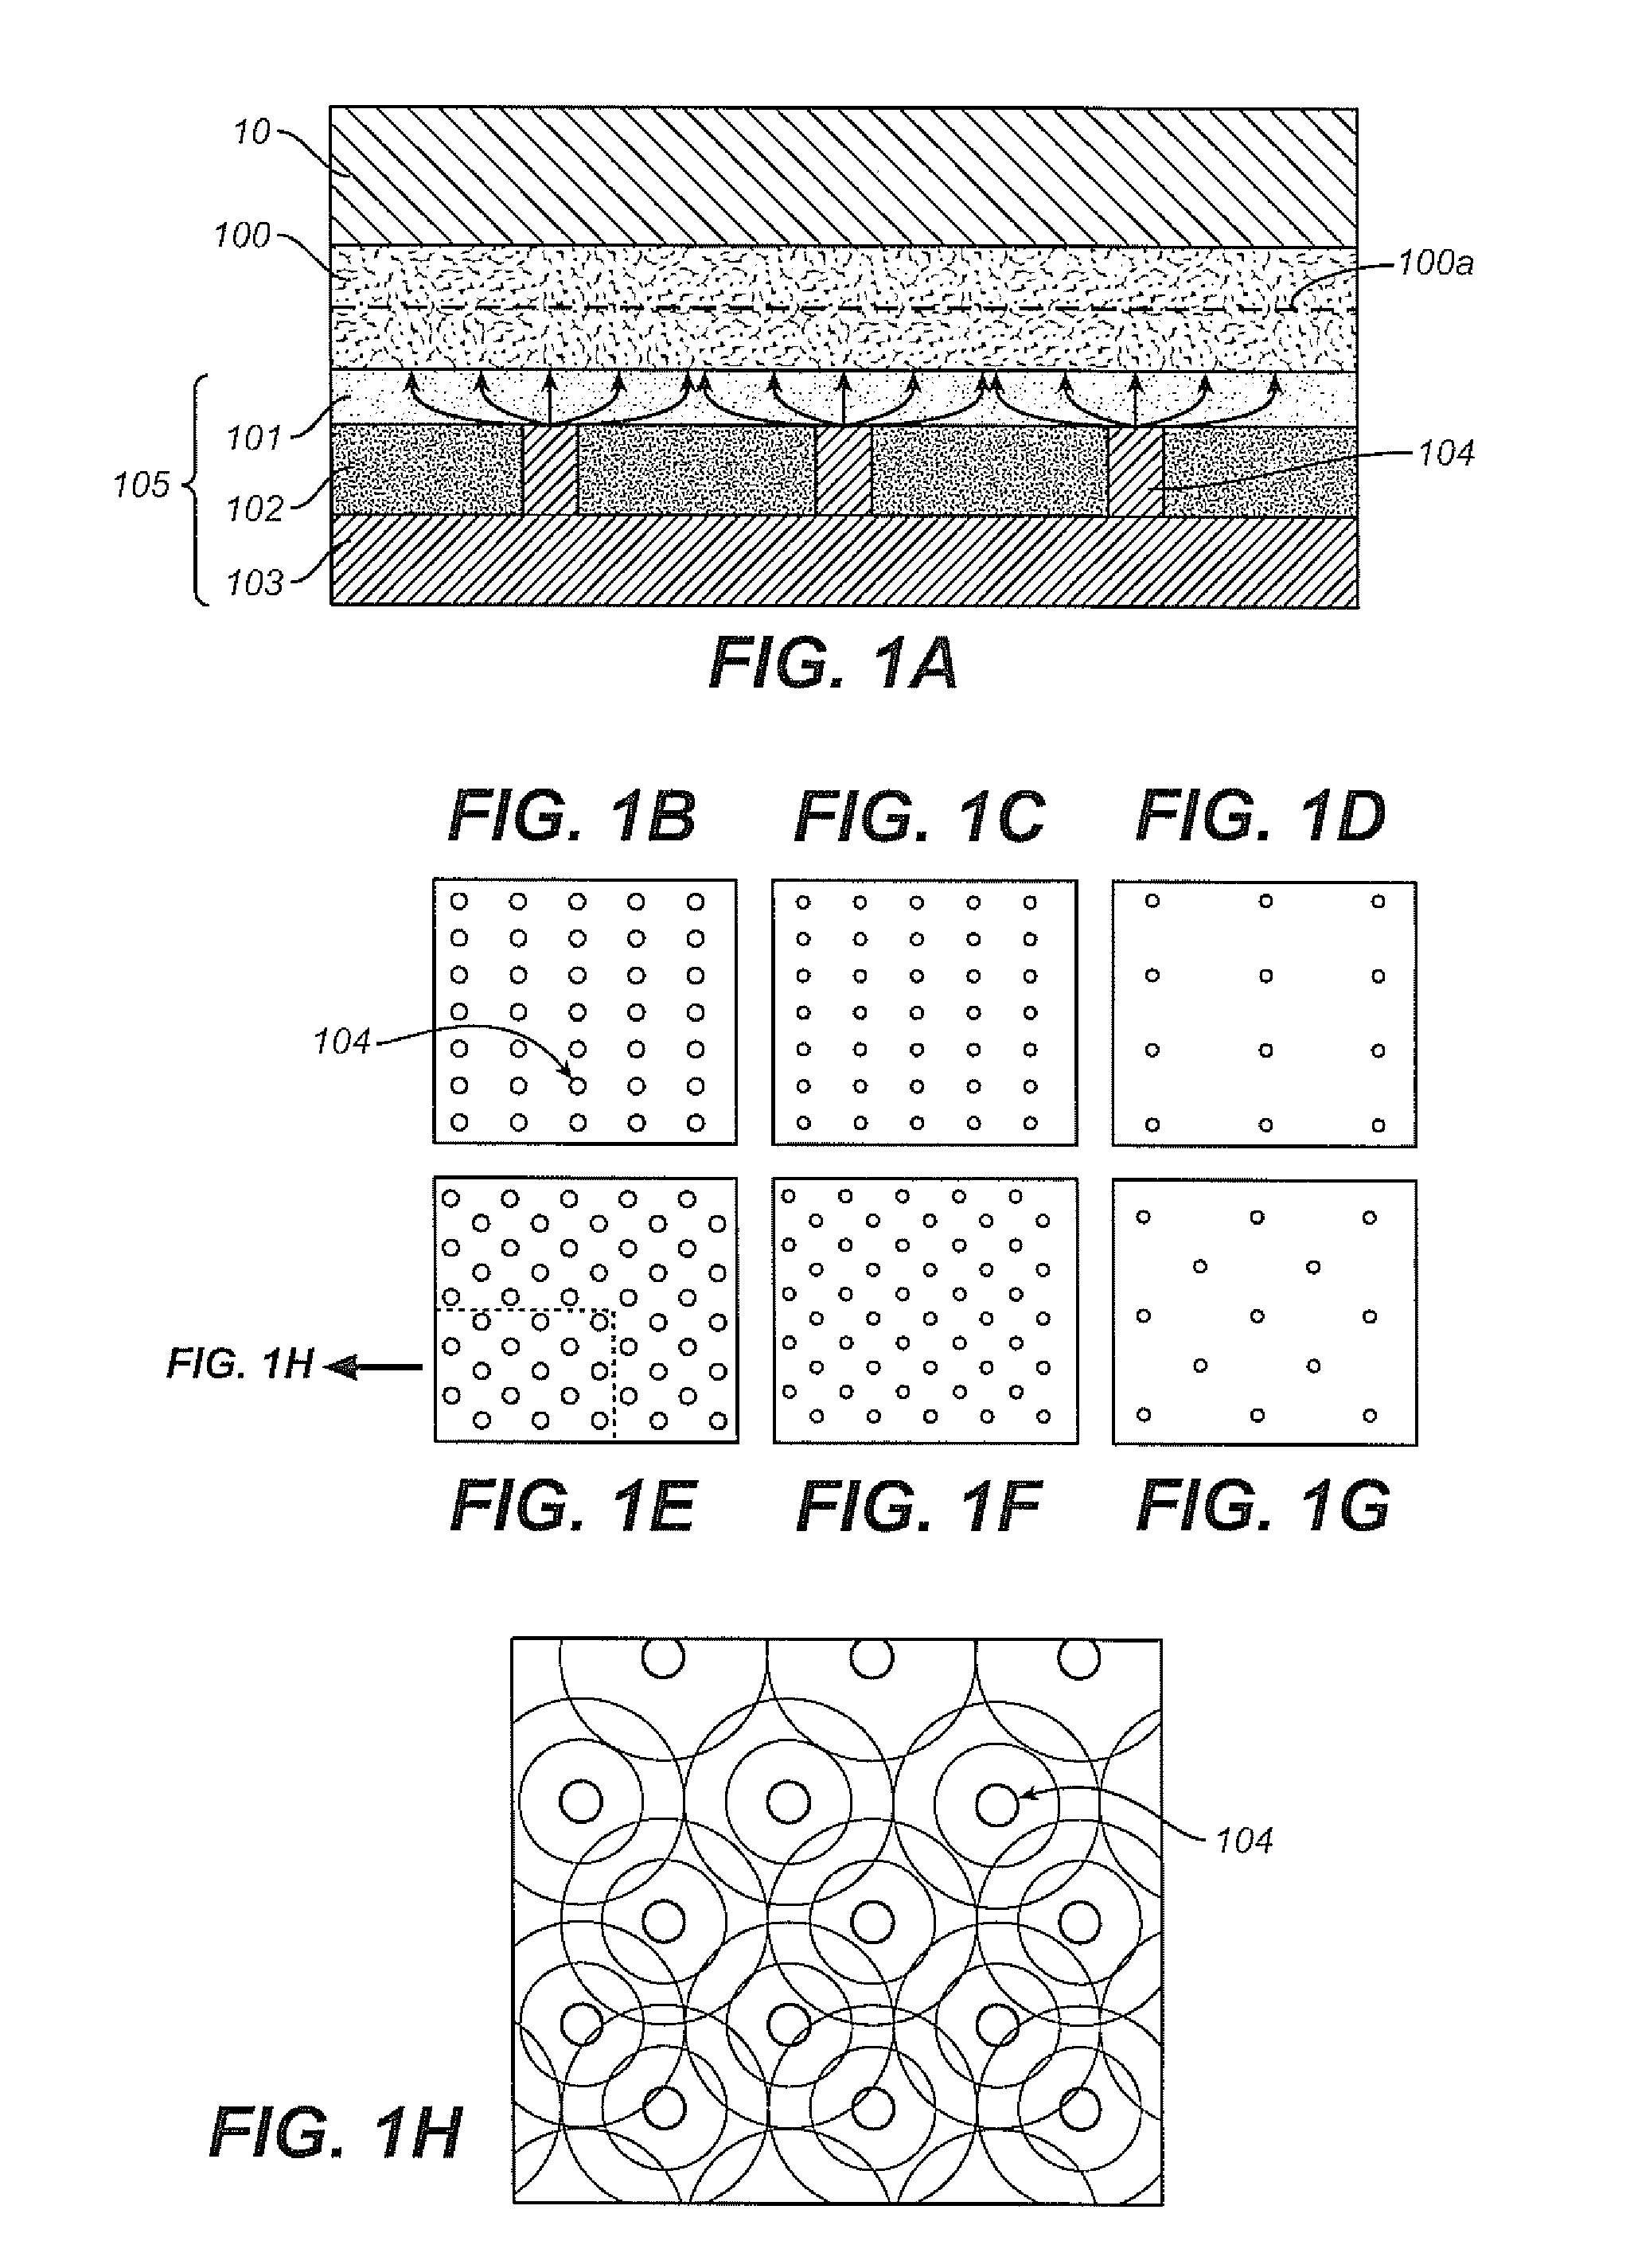 System for high efficiency solid-state light emissions and method of manufacture